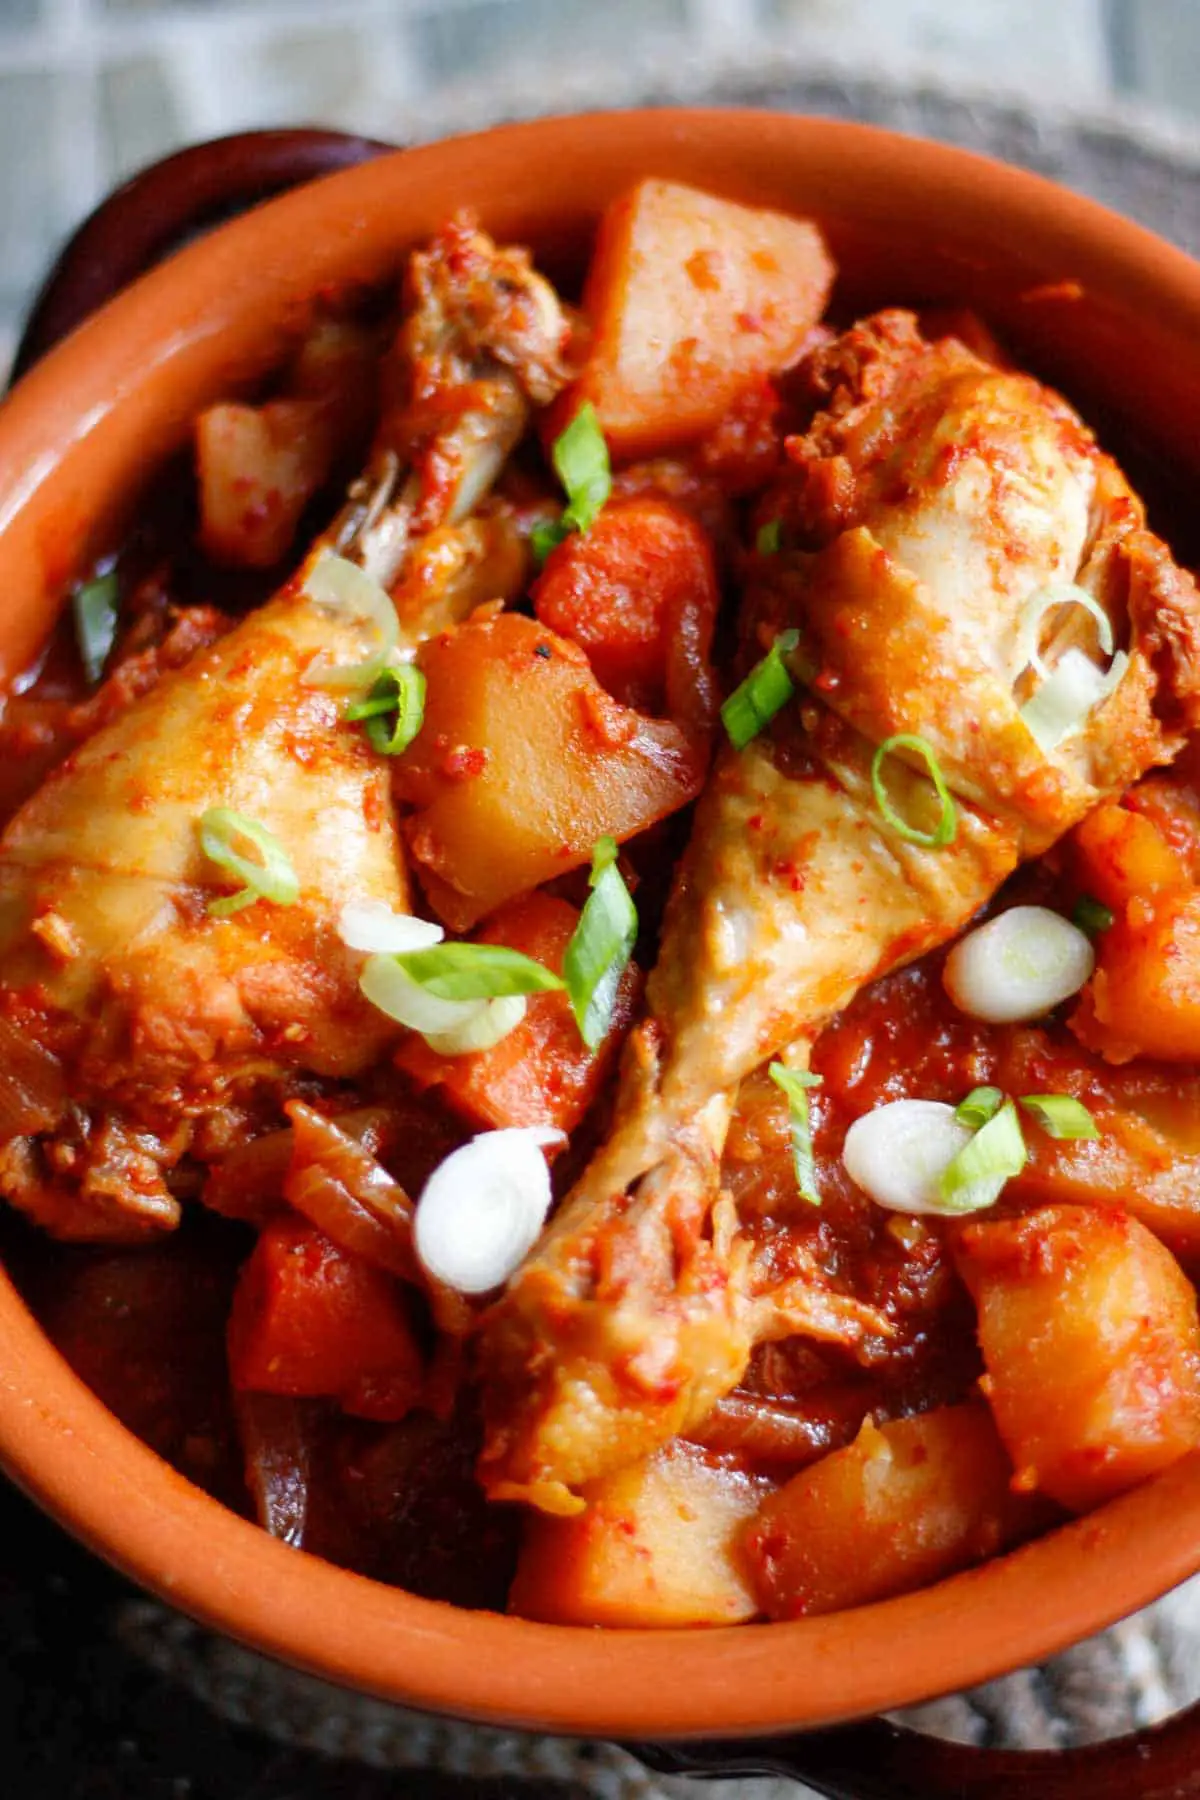 Chicken drumsticks in a spicy sauce with pieces of potato and carrots garnished with green onions in a bowl.